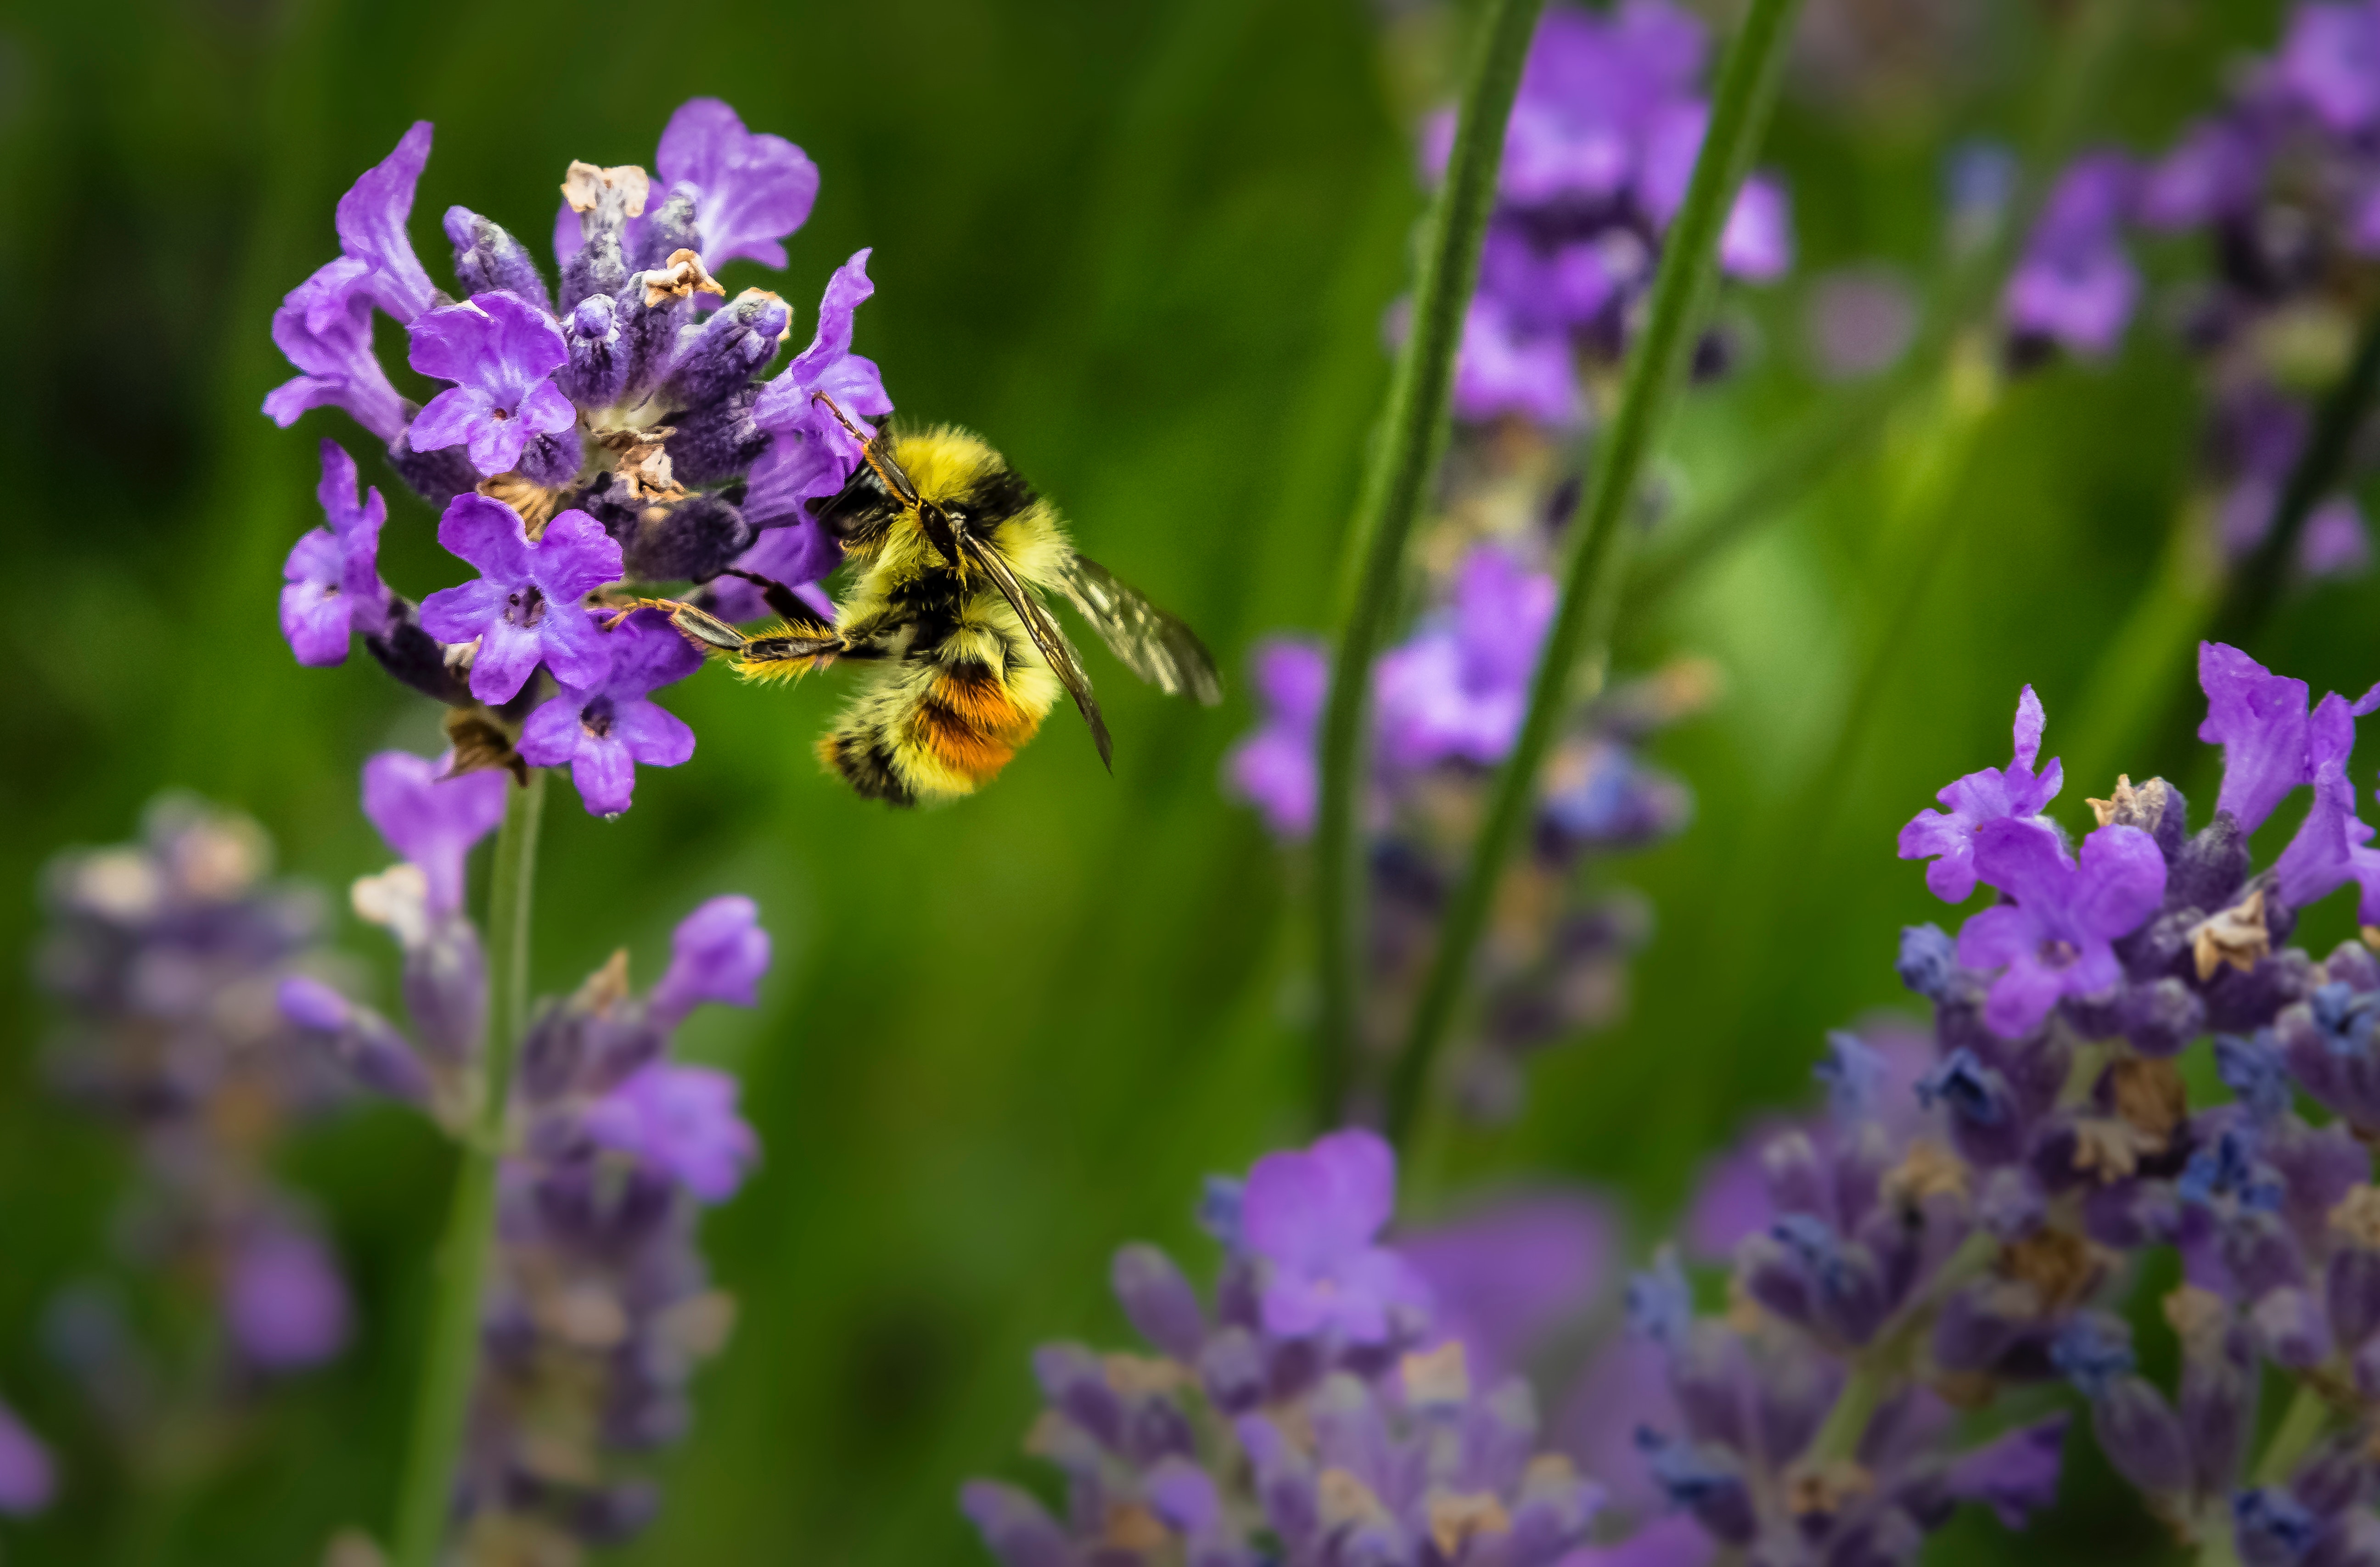 close-up of a bee pollinating a patch of purple flowers